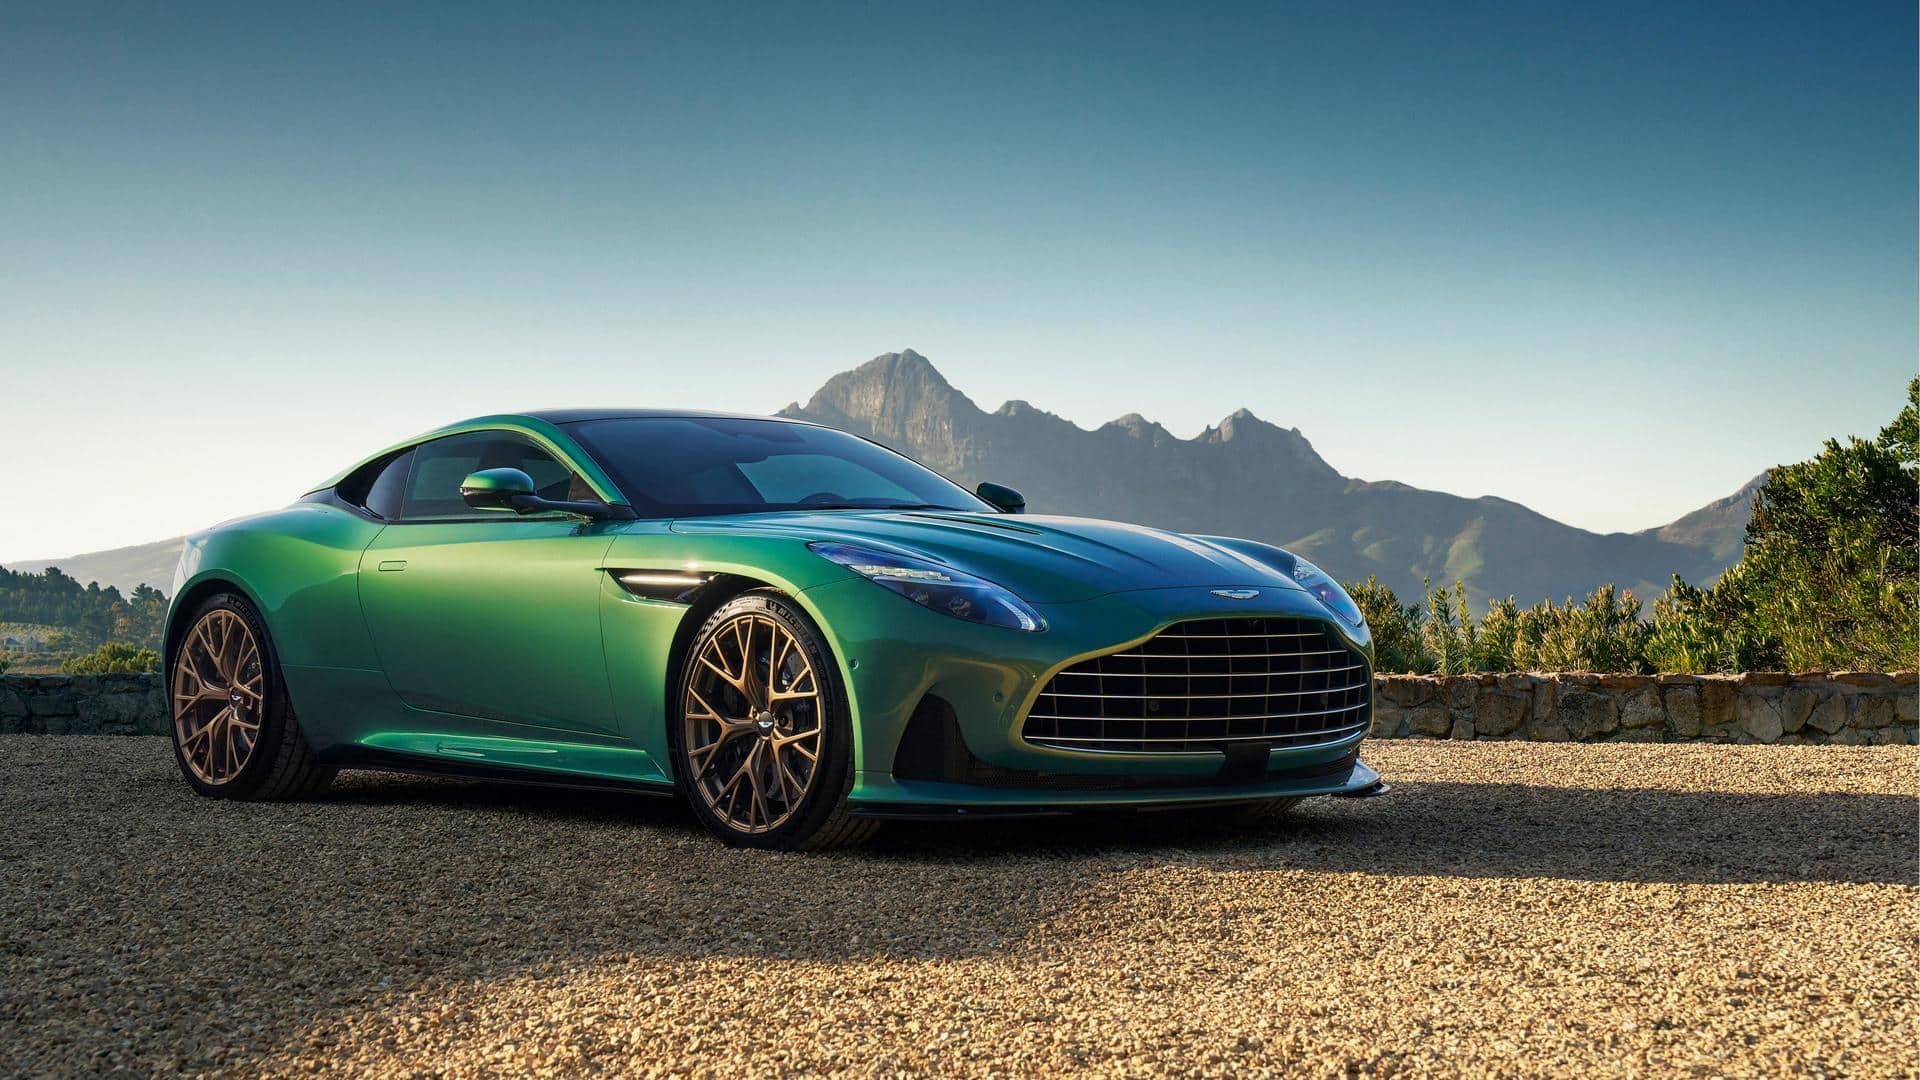 Aston Martin DB12 grand tourer revealed: Check top features